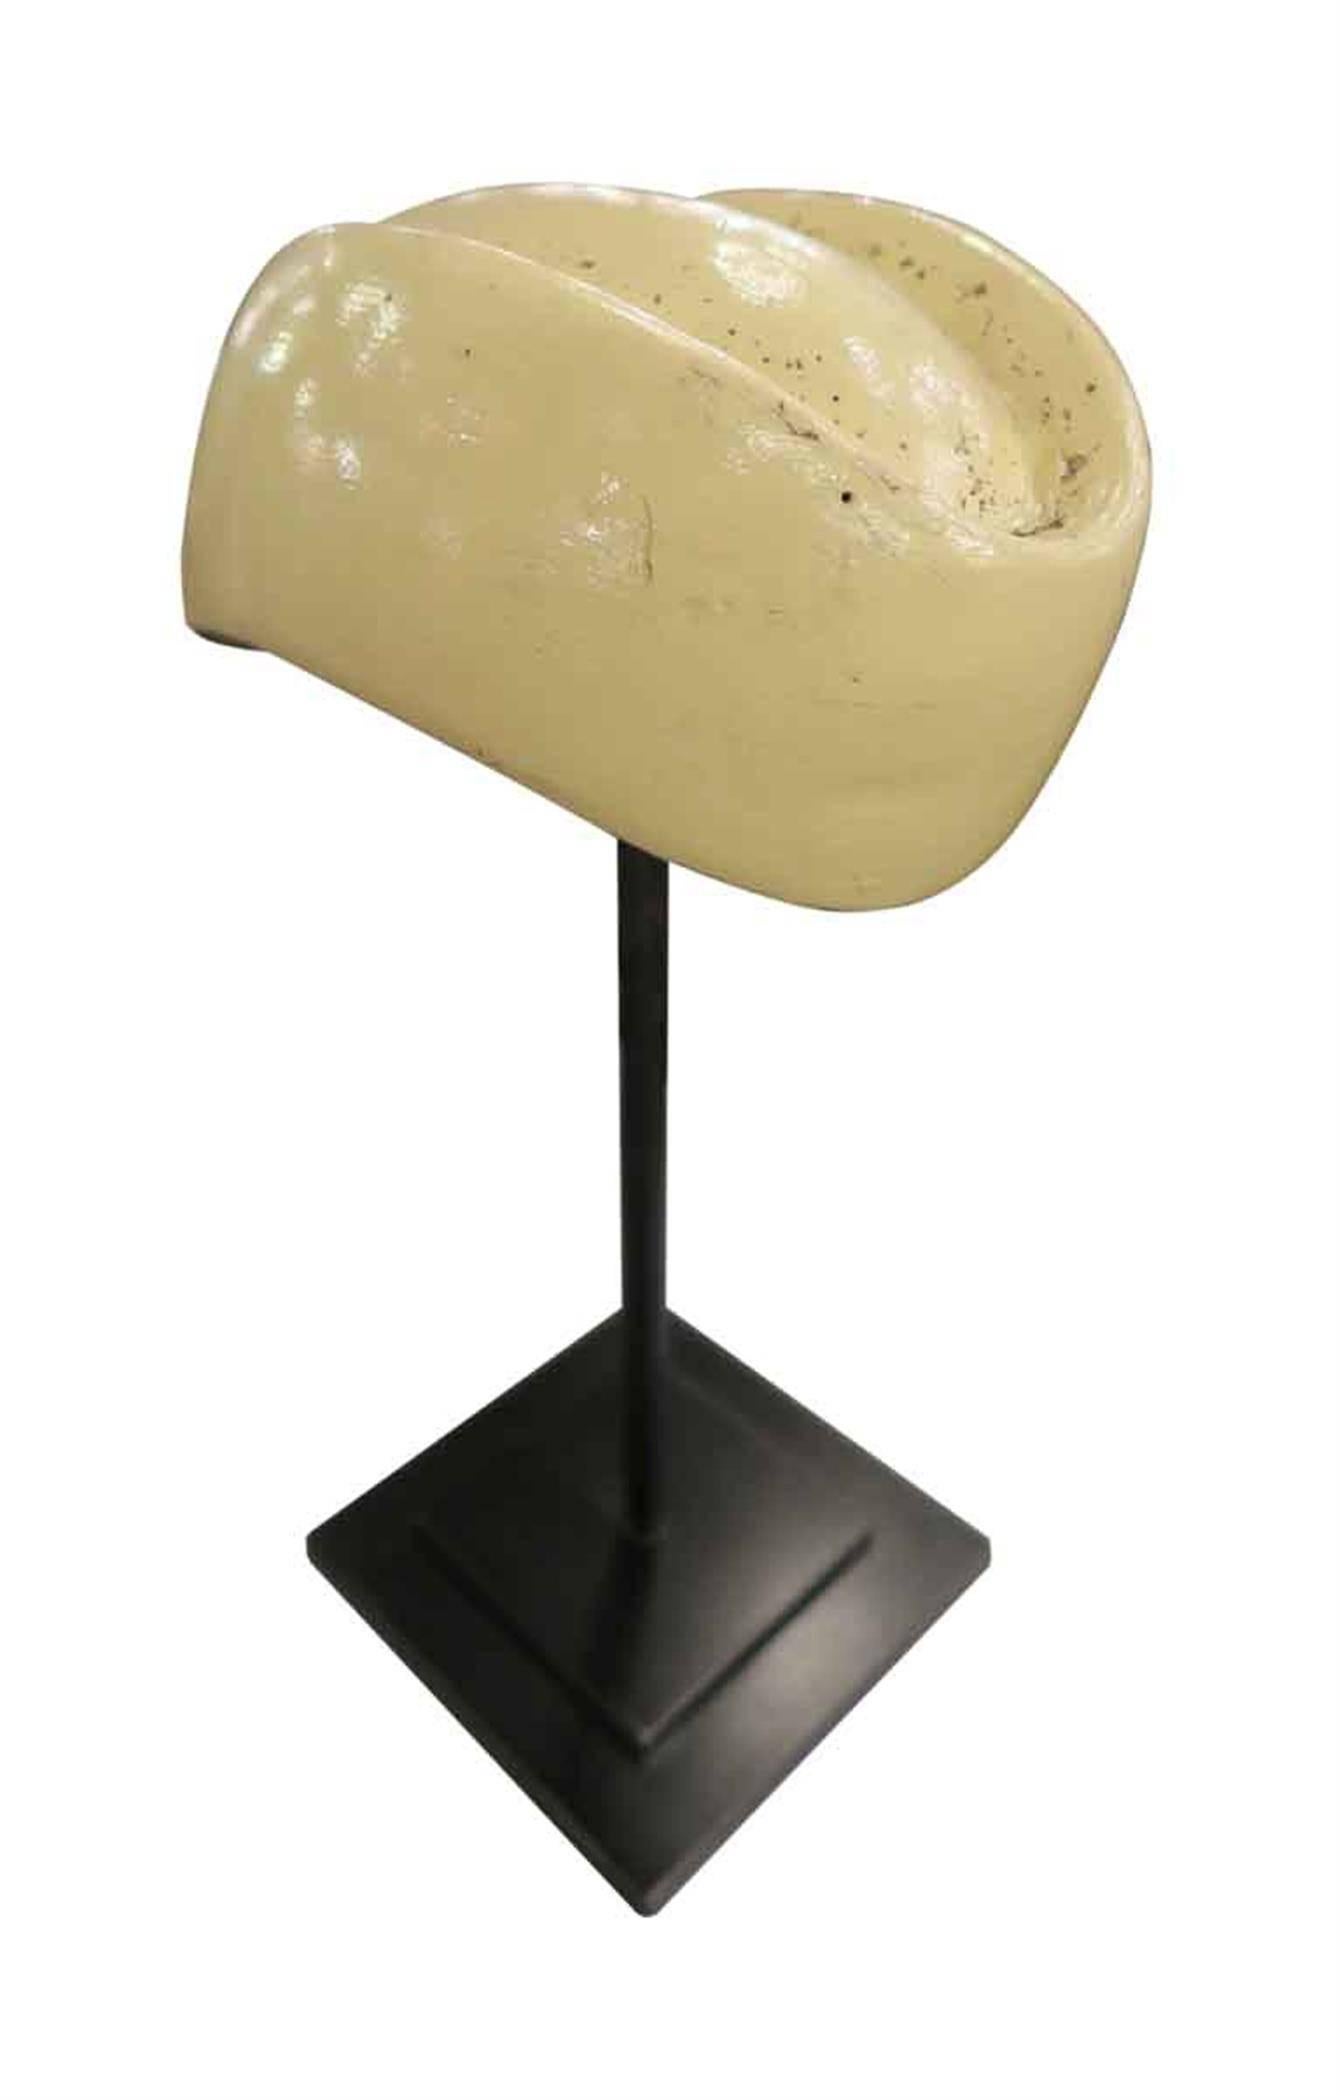 1960s vintage French tan hat mold sculpture on a black steel stand. This can be viewed at one of our New York City locations. Please inquire for the exact address.